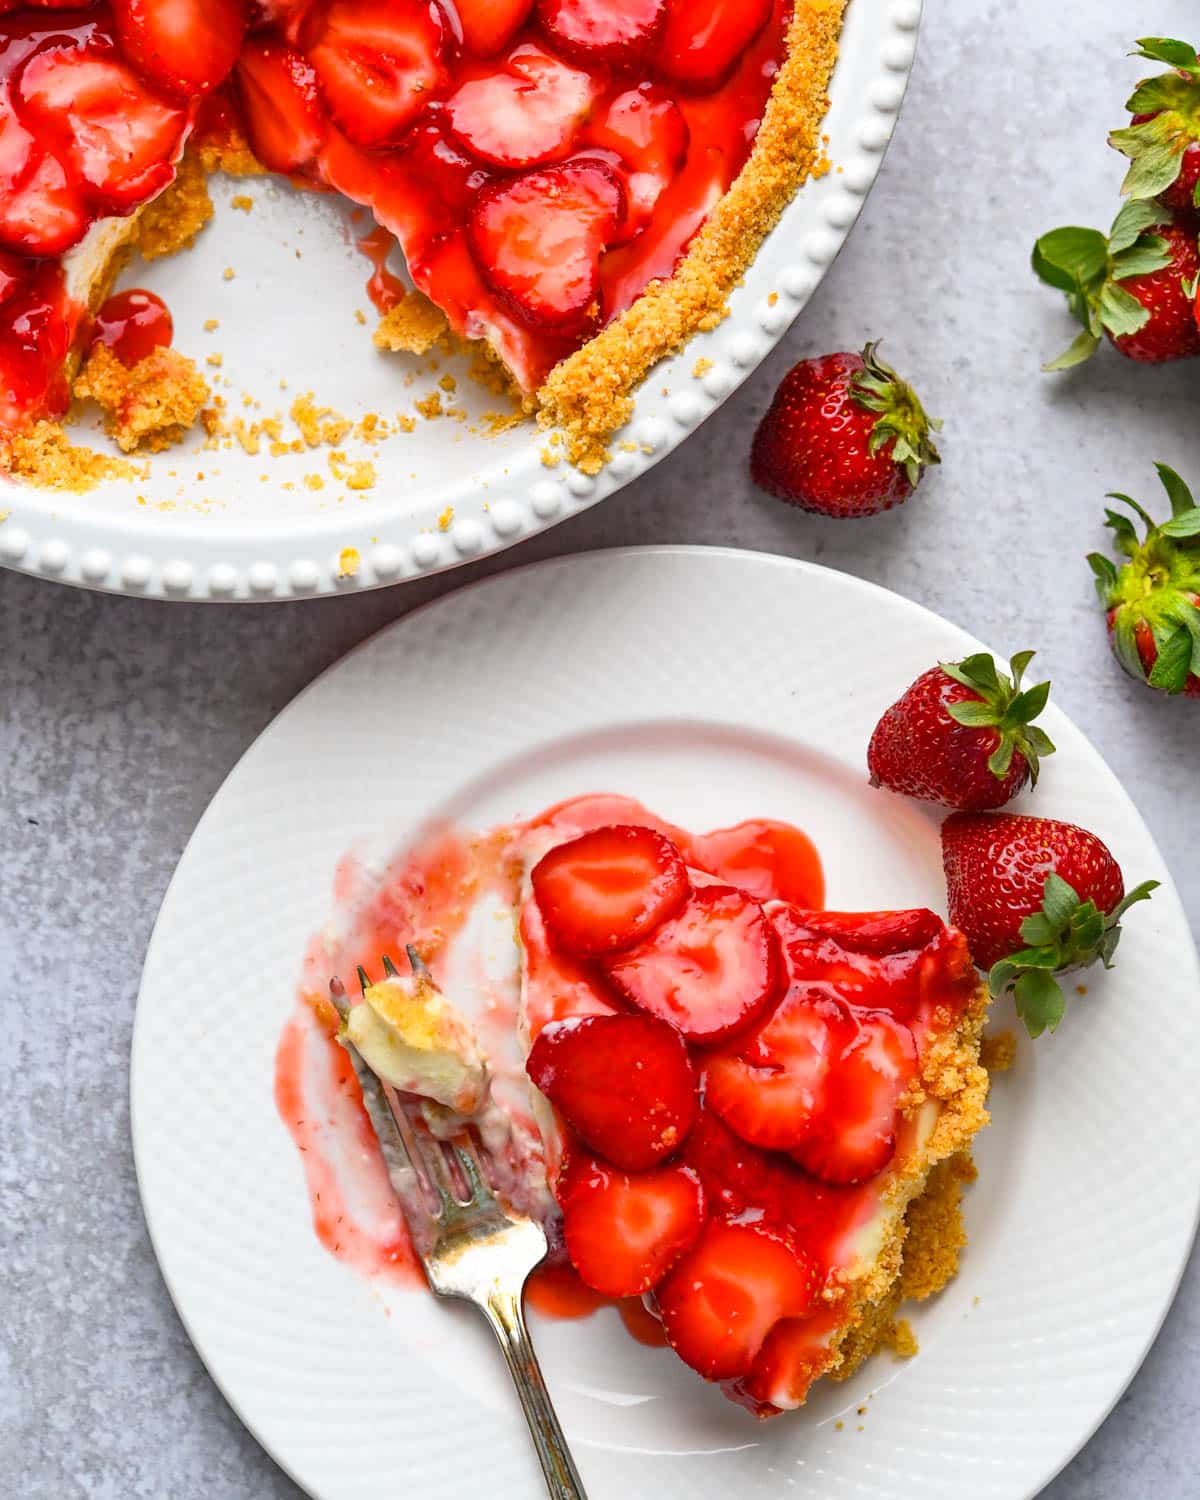 A piece of the strawberry ricotta pie on a plate.